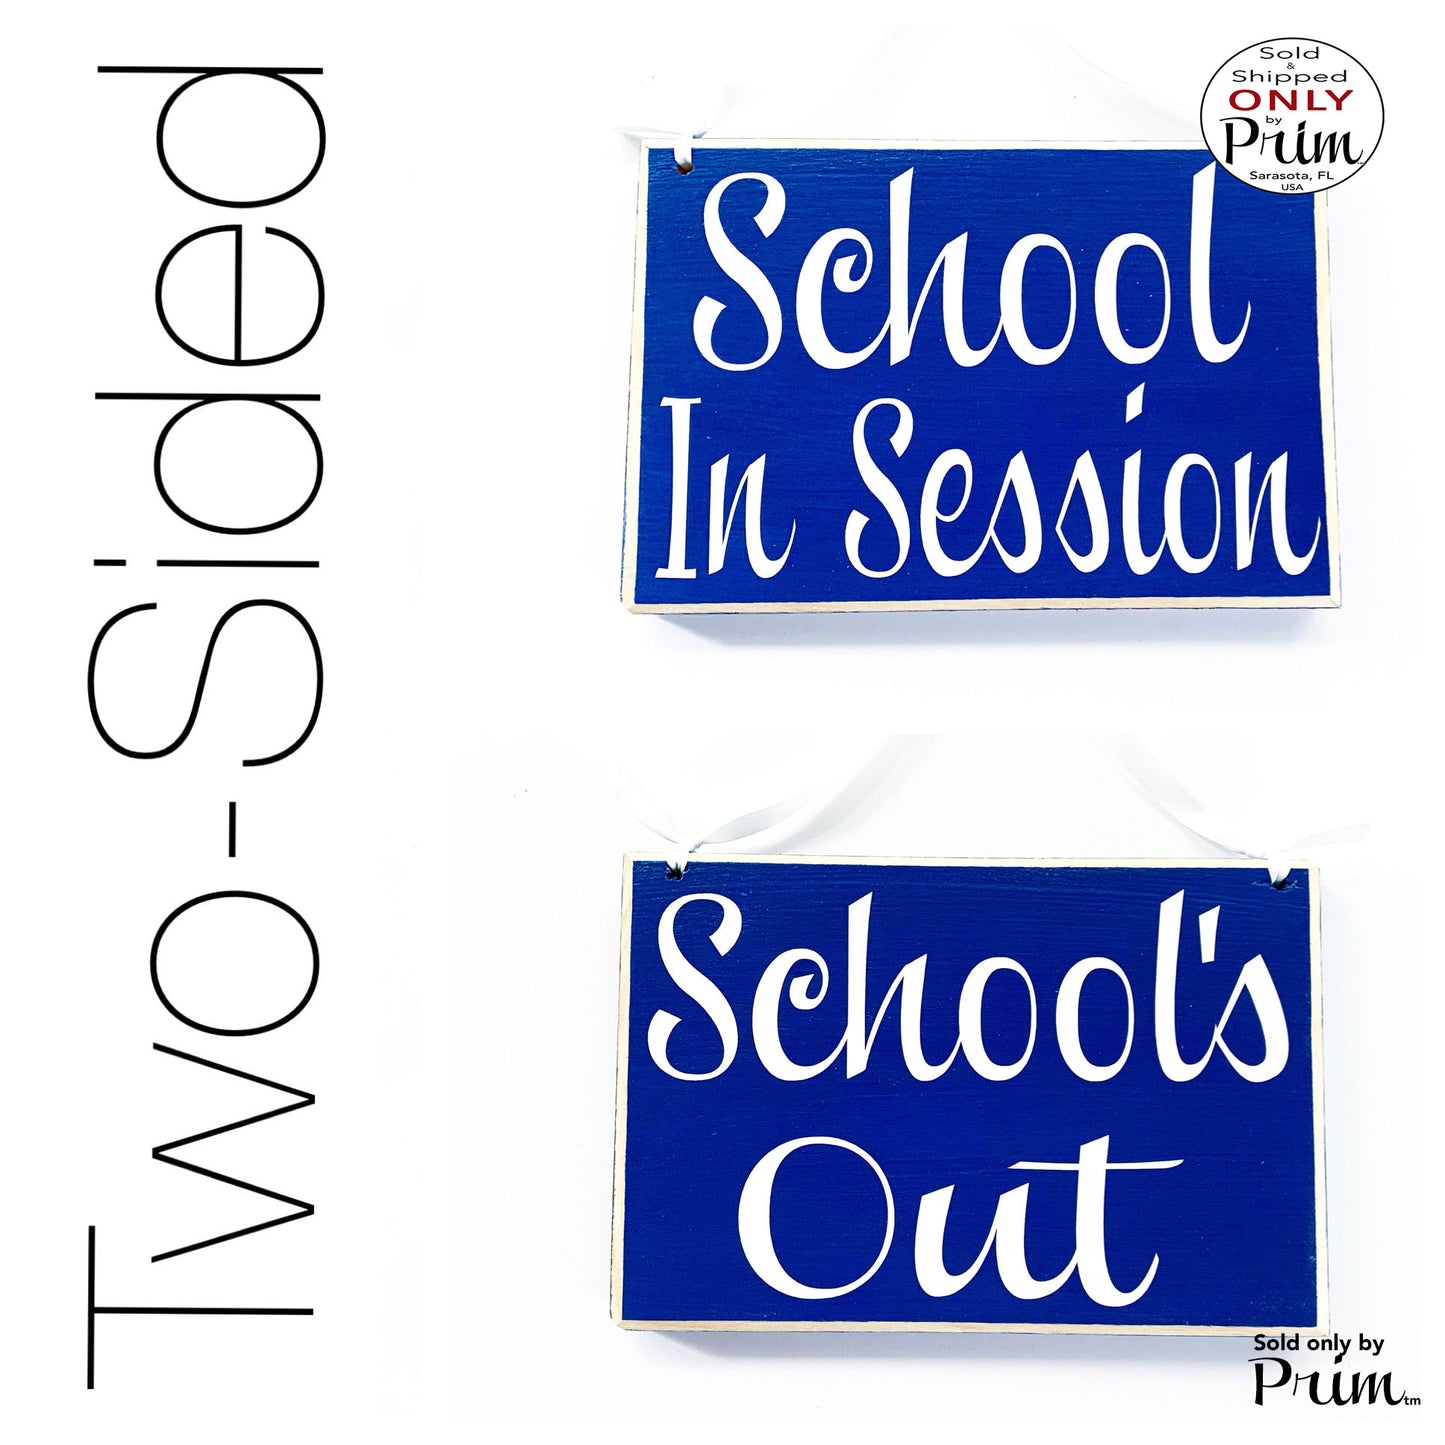 8x6 School In Session school Is Out Custom Wood Sign Class In Session Home School Teacher School Progress Students Testing Wall Door Plaque Designs by Prim